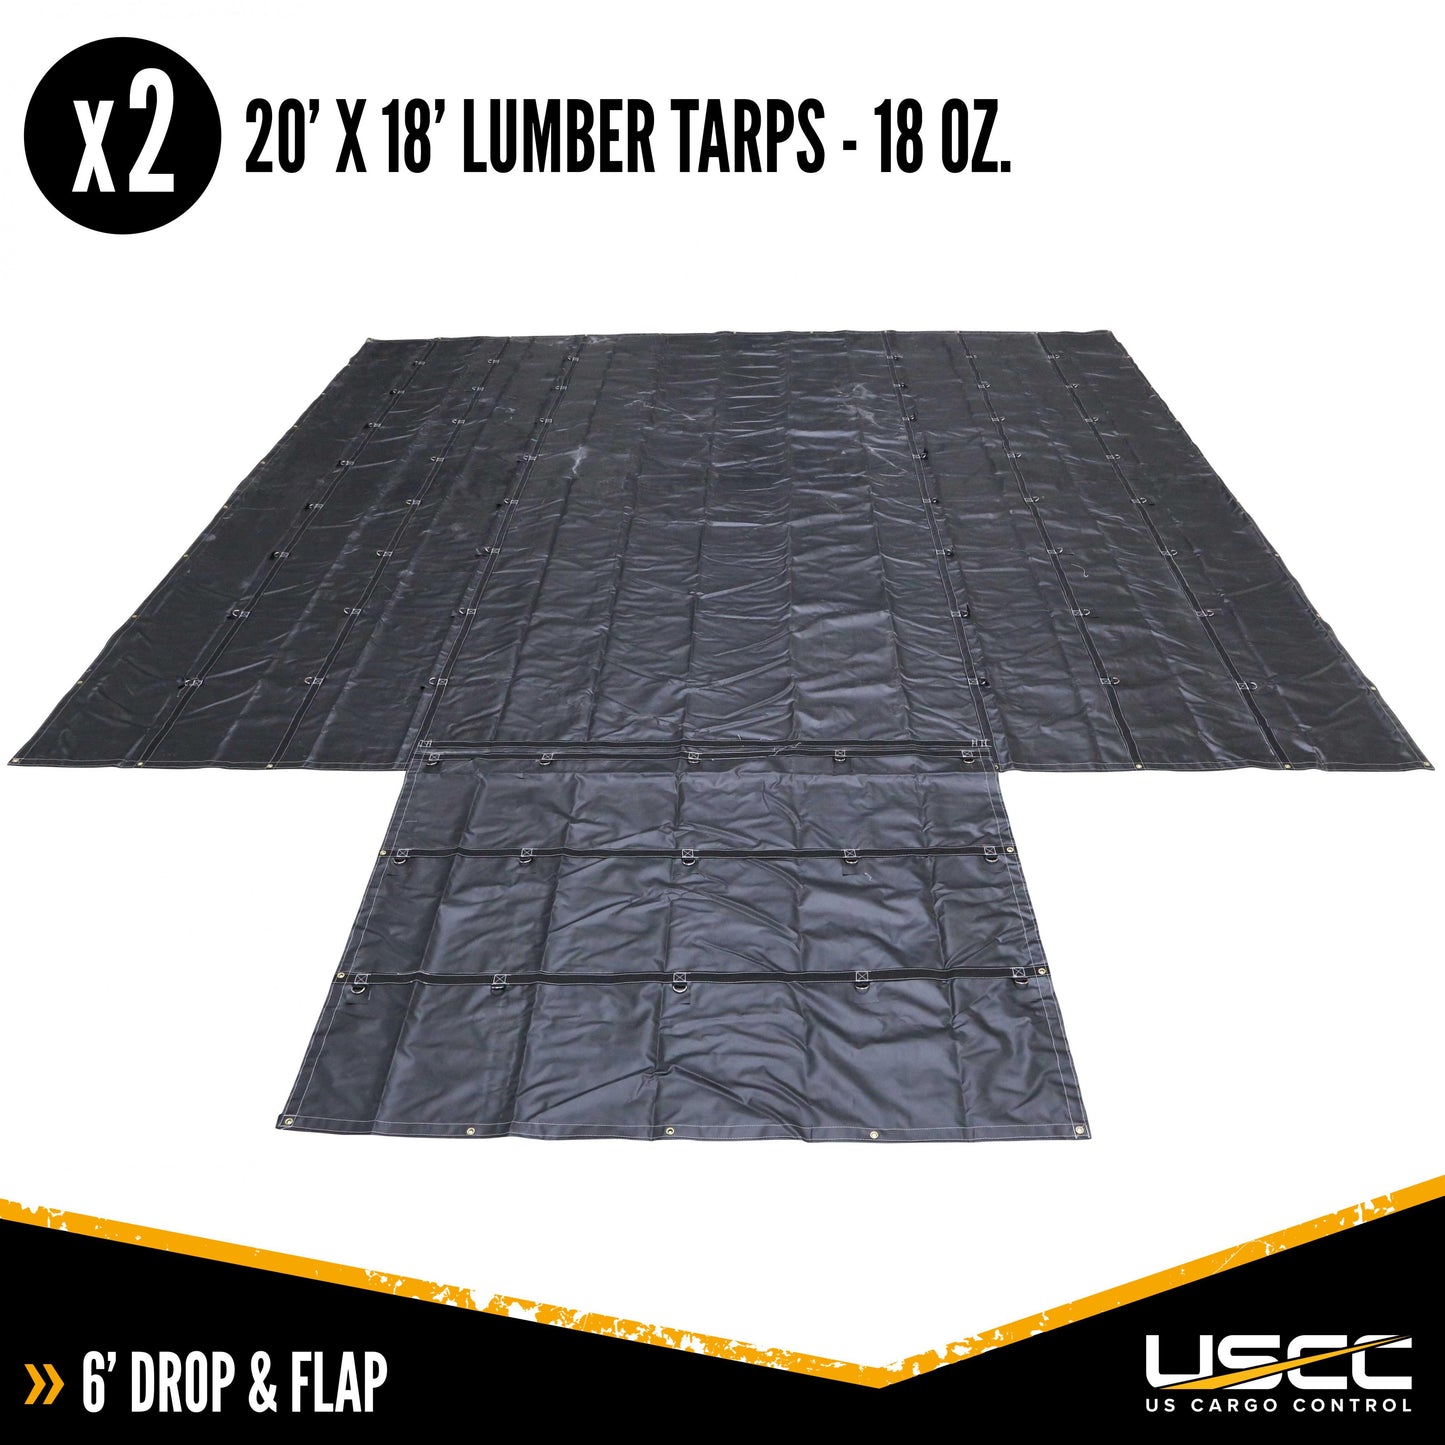 18 oz 3 Piece Lumber Tarp 20 foot x 18 foot (6 foot Drop) for all 3 pieces Black image 2 of 10